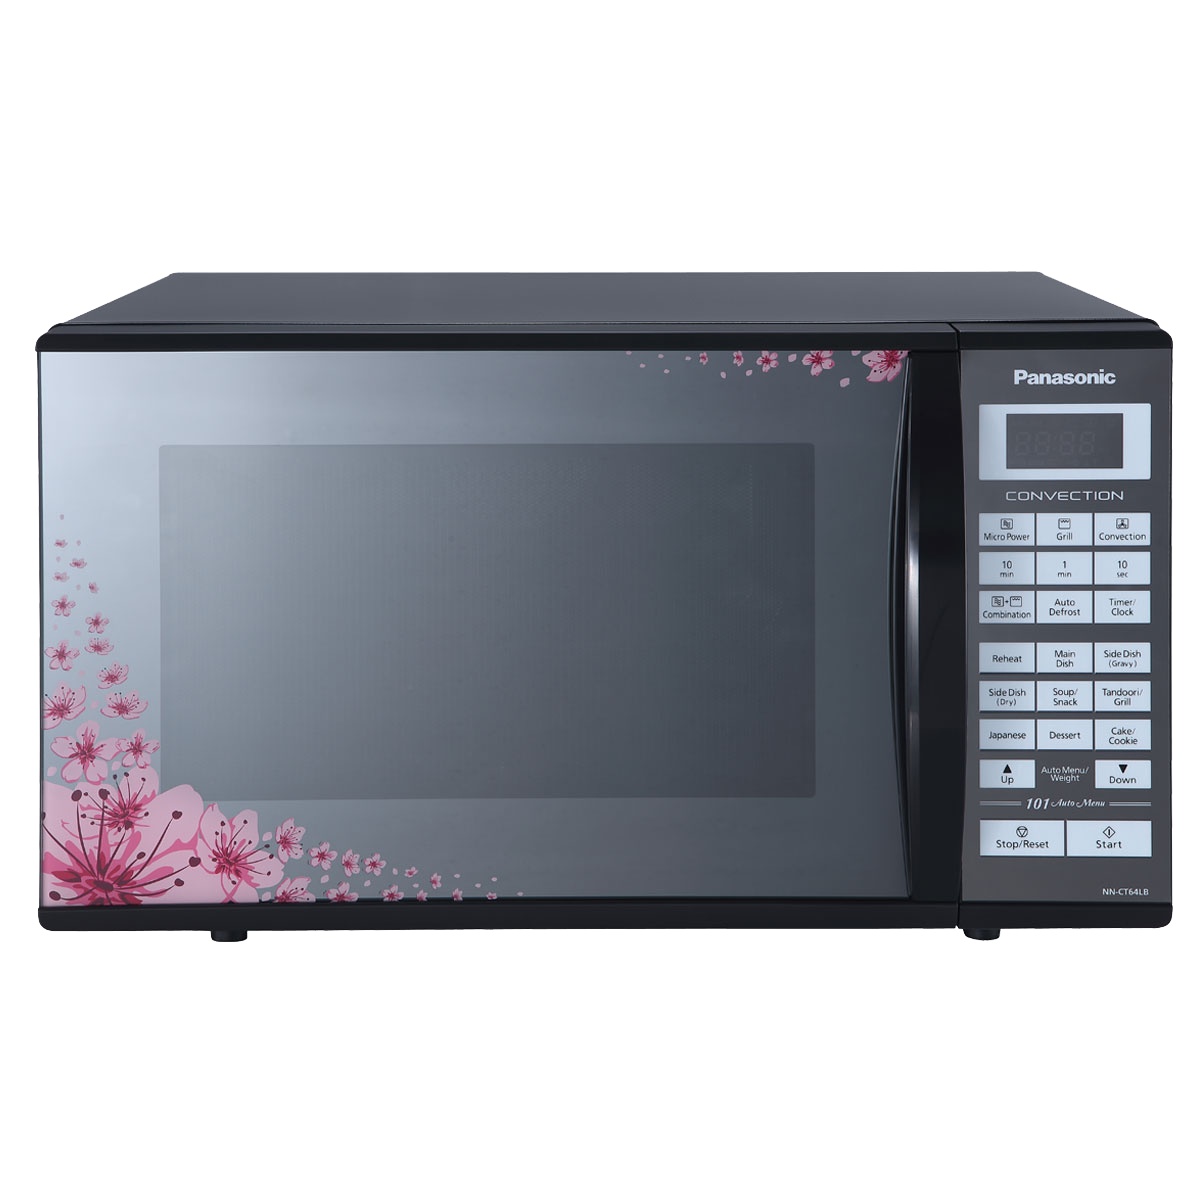 Panasonic 27 Litres Convection Microwave Oven (Floral Mirror Finish, NN-CT64LBFDG, Floral Mirror Finish)_1